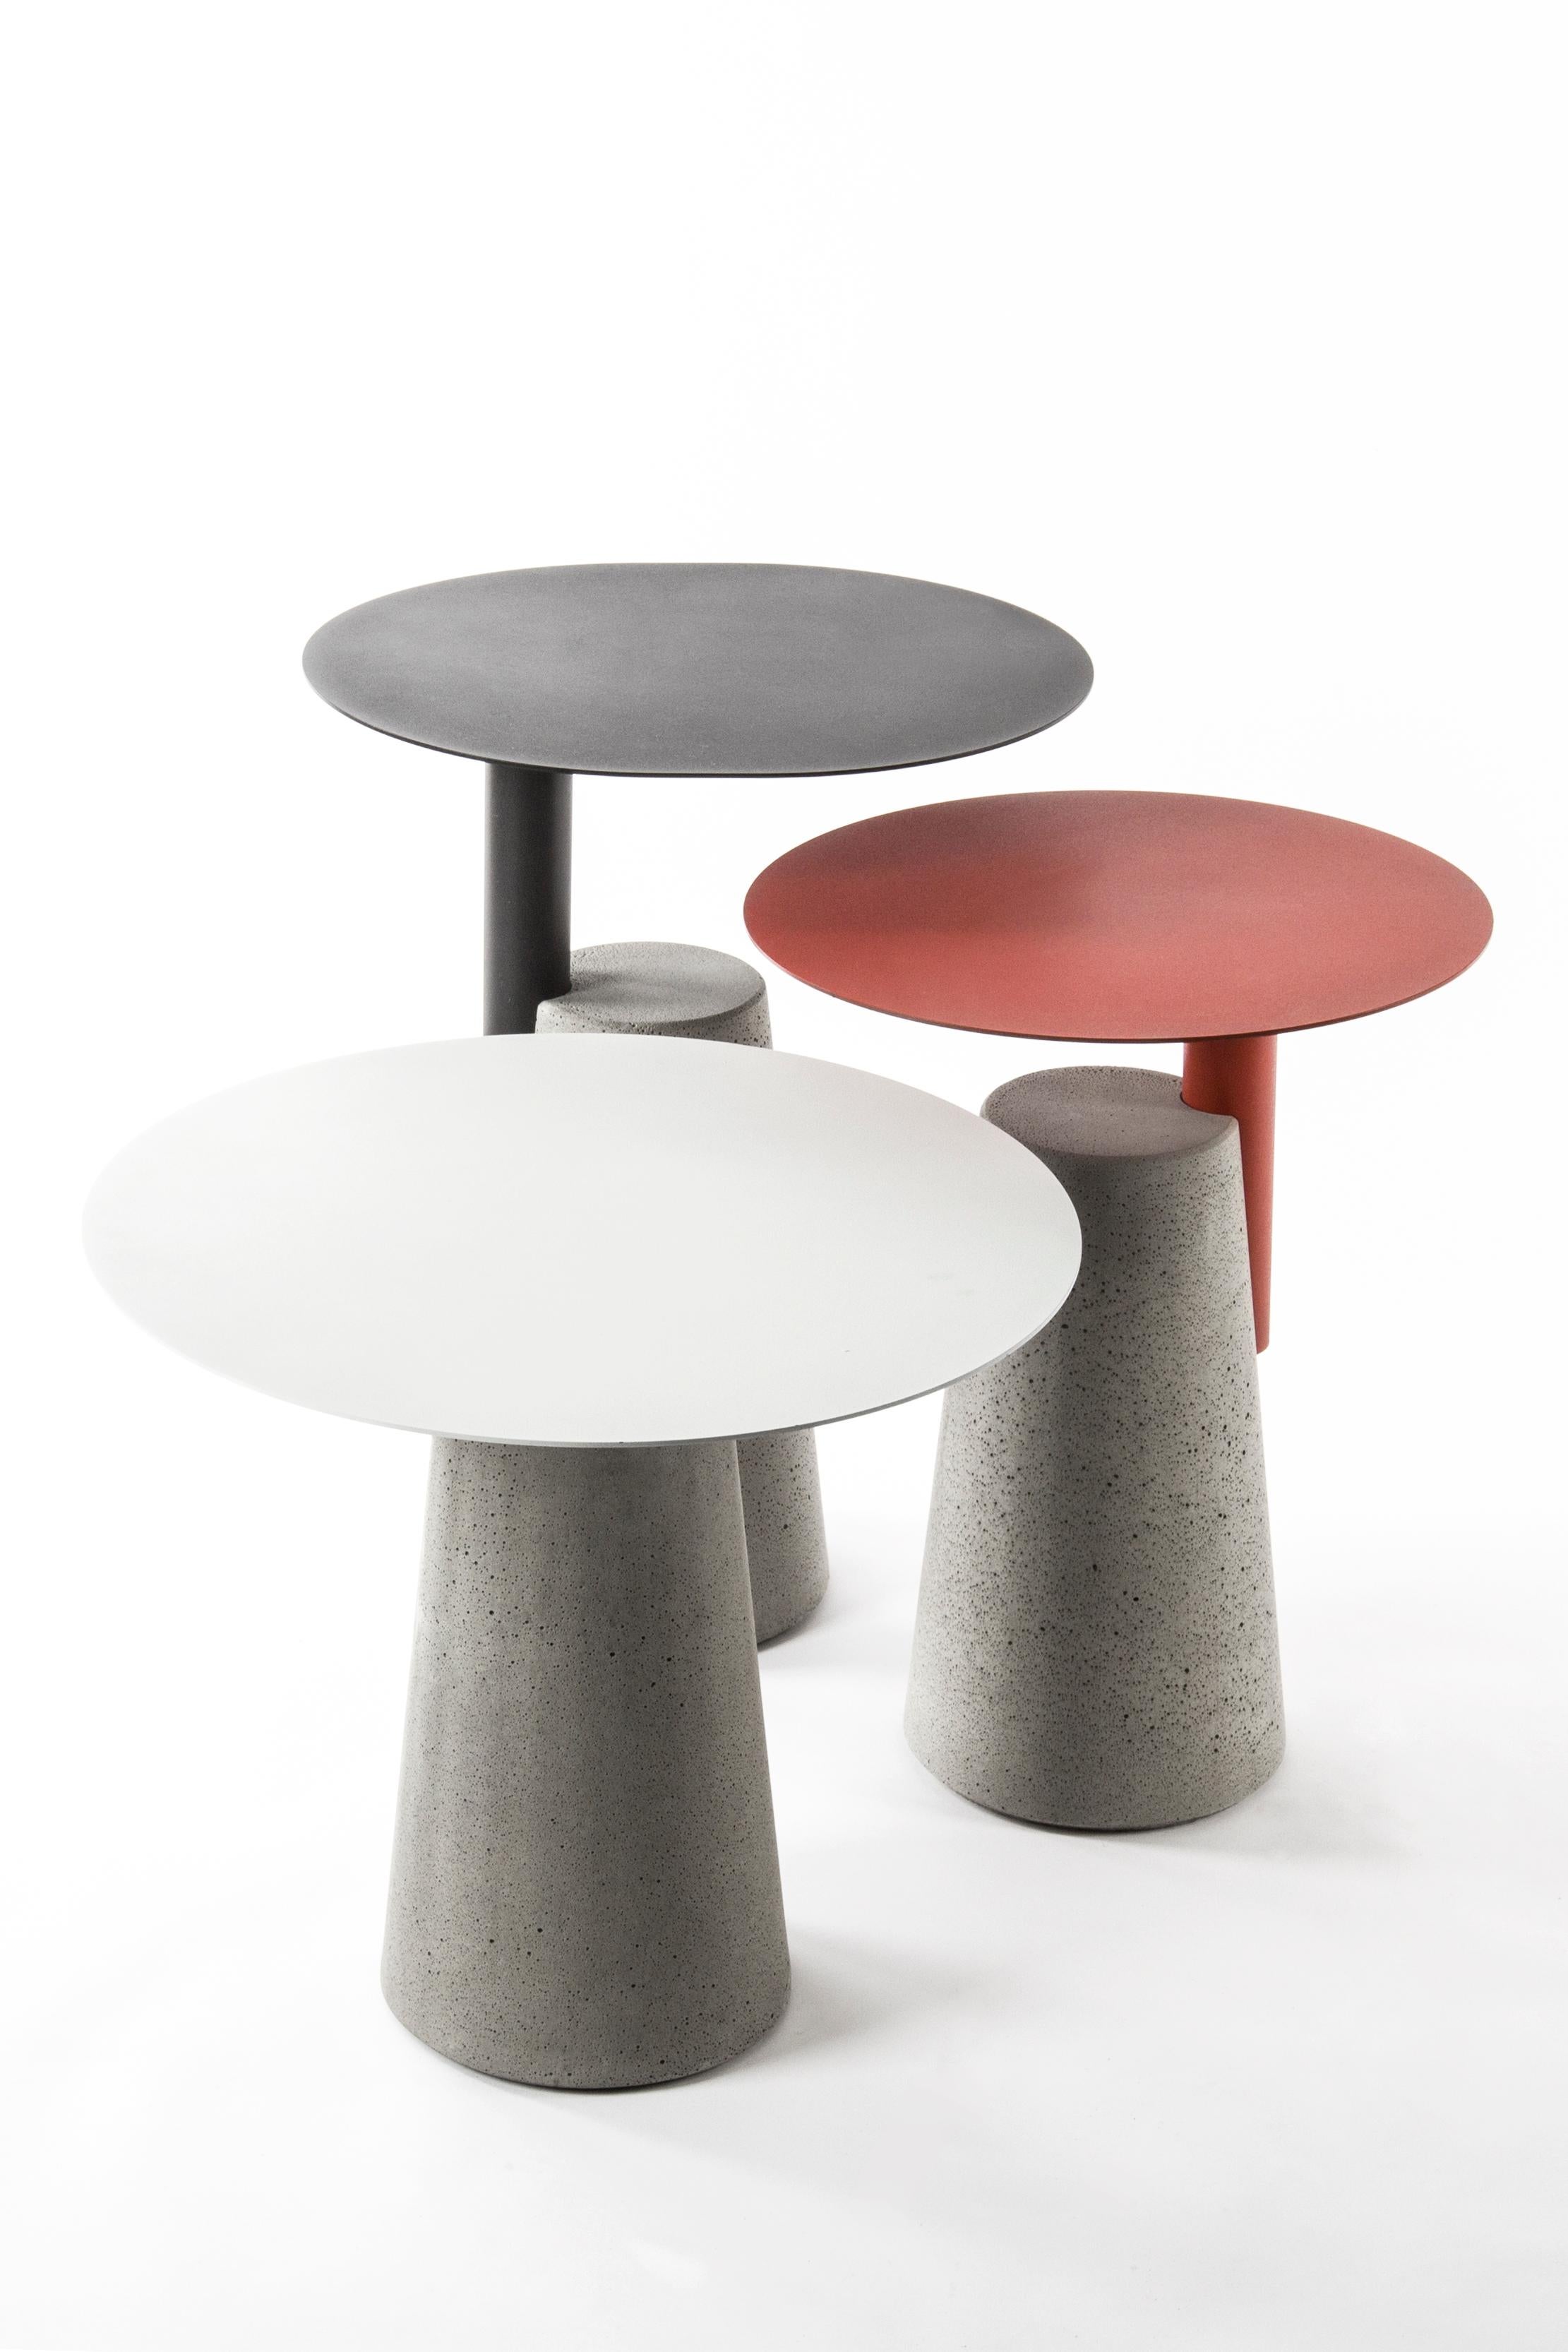 Chinese Concrete and Powder Coated Steel Side Table, “Bai, ” M, Red, from Concrete